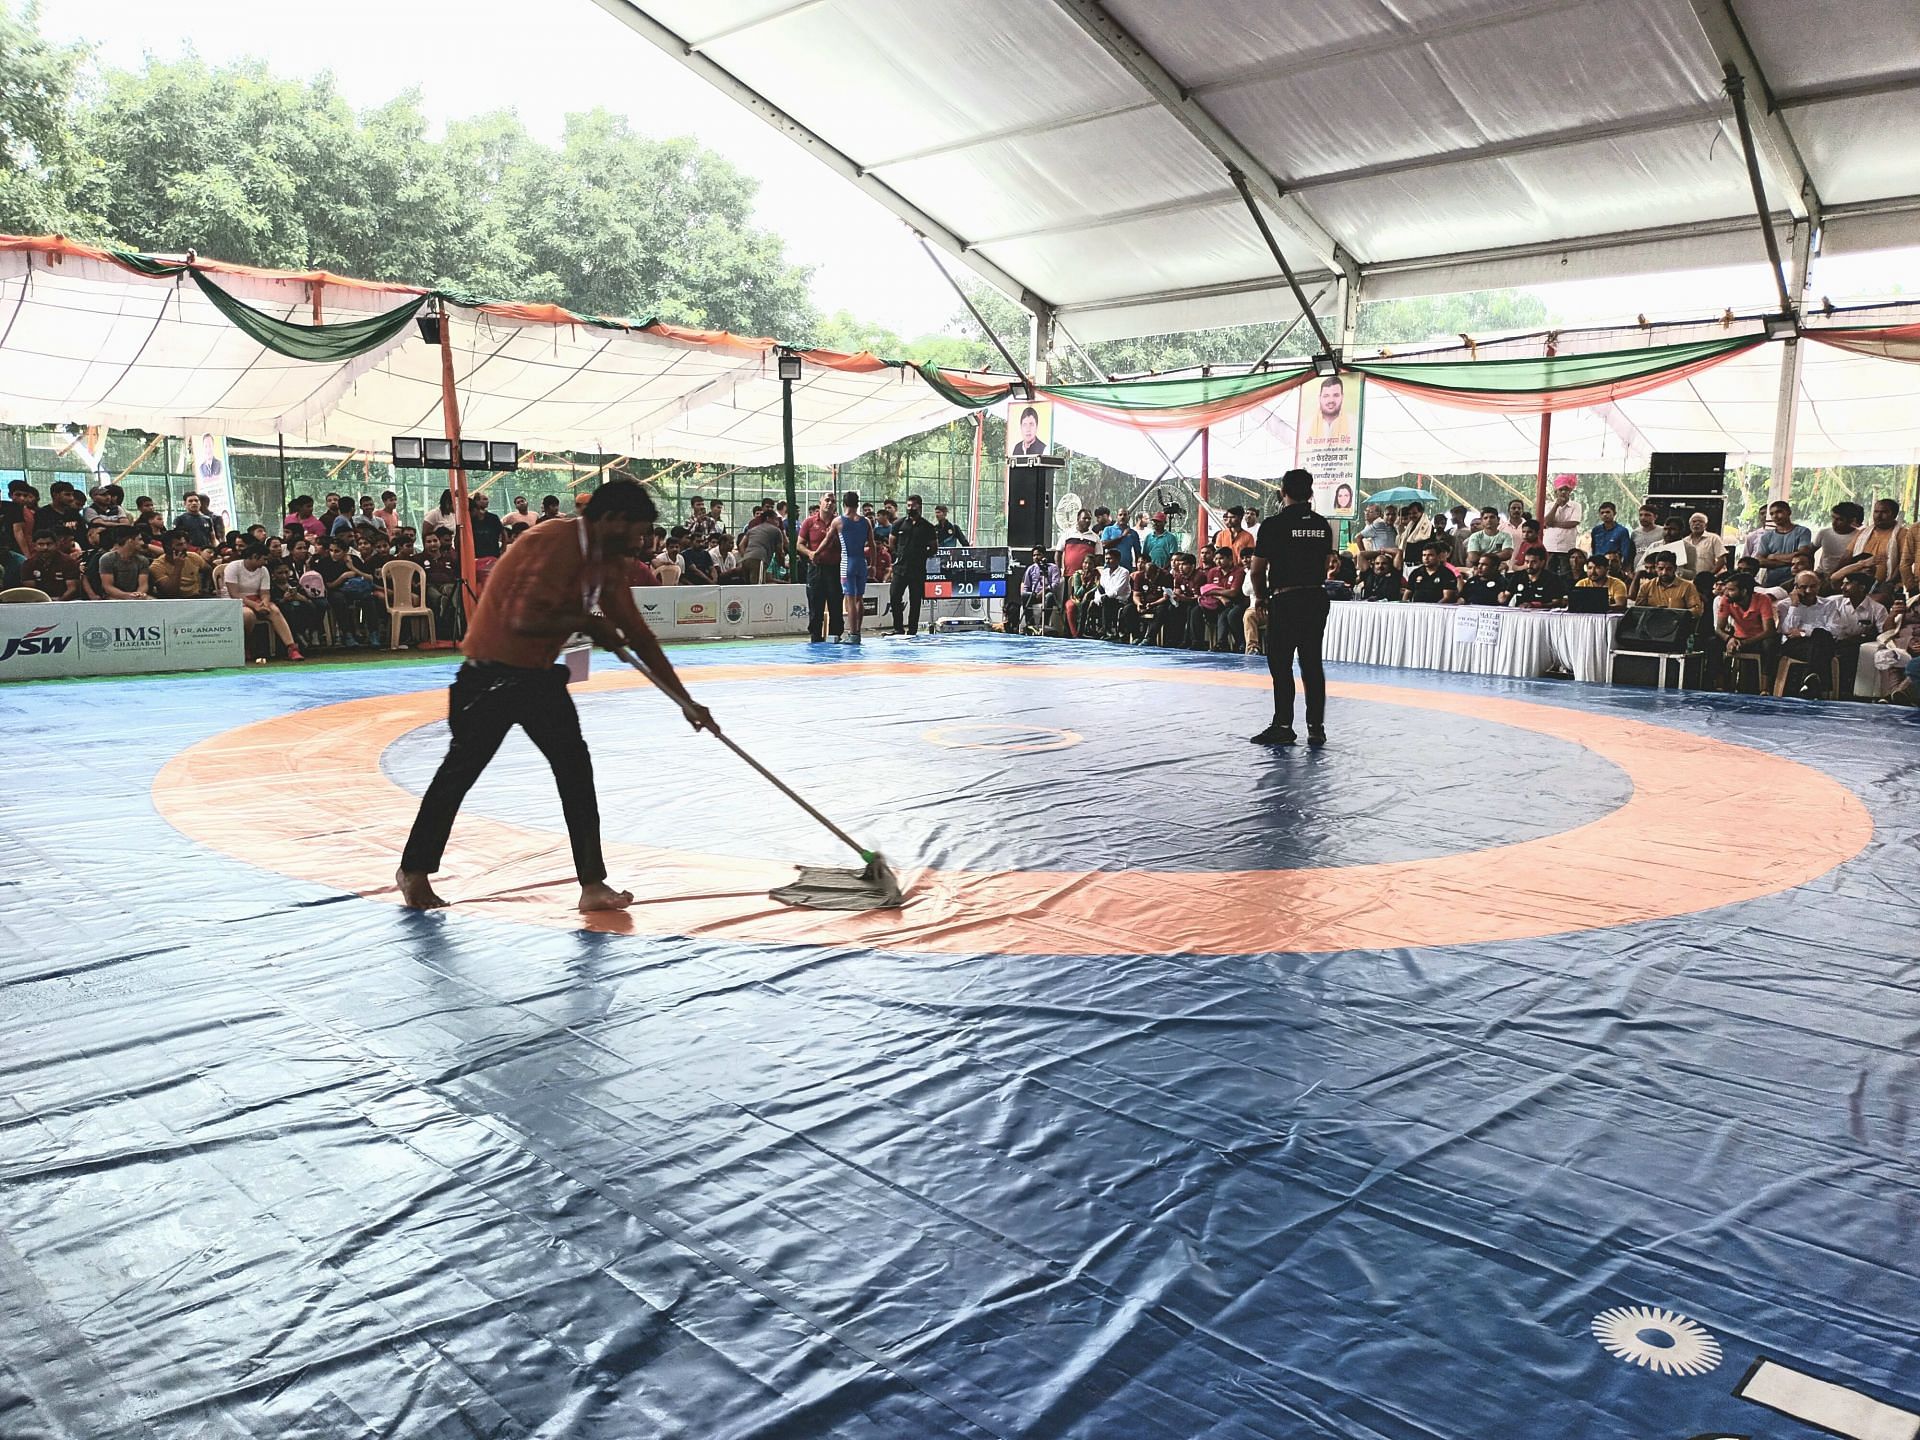 Housekeeping staff cleaning the mat as water trickle down from the makeshift tent during the Federation Cup U17 Wrestling Championship in Delhi on Thursday. Photo credit Navneet Singh